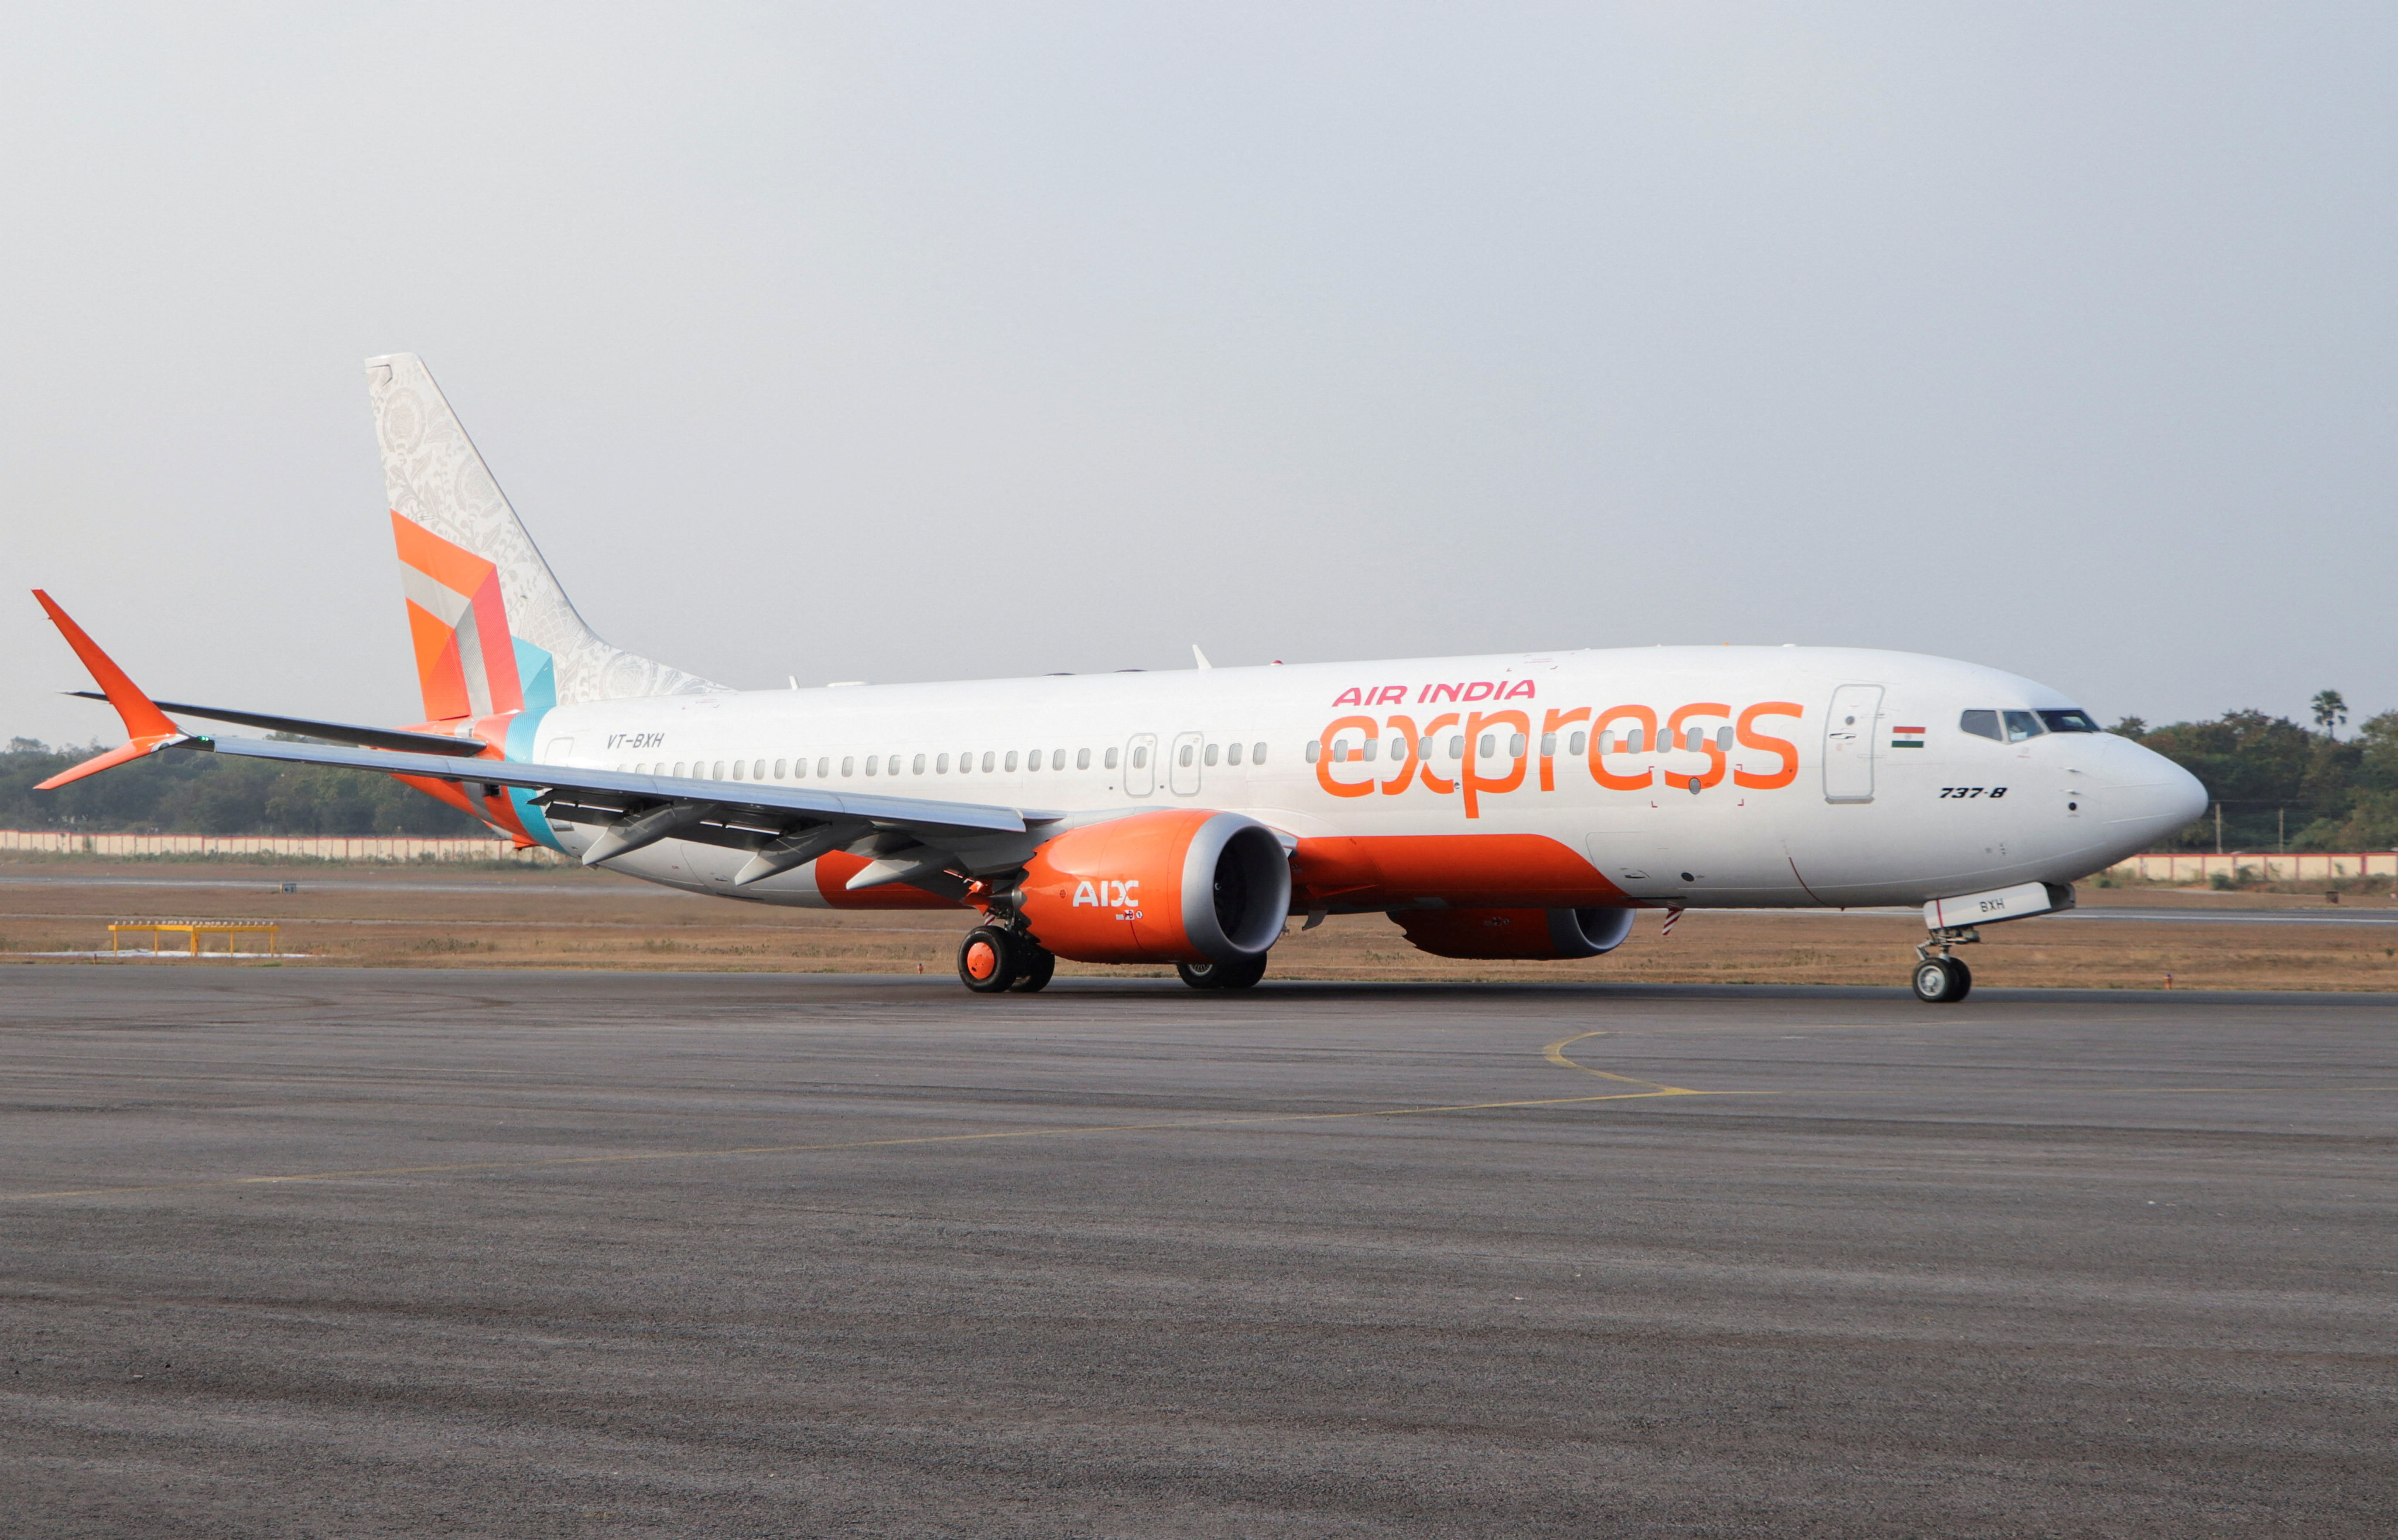 Air India Express had to cancel more than 80 flights as cabin crew called in sick en masse. Photo: Reuters